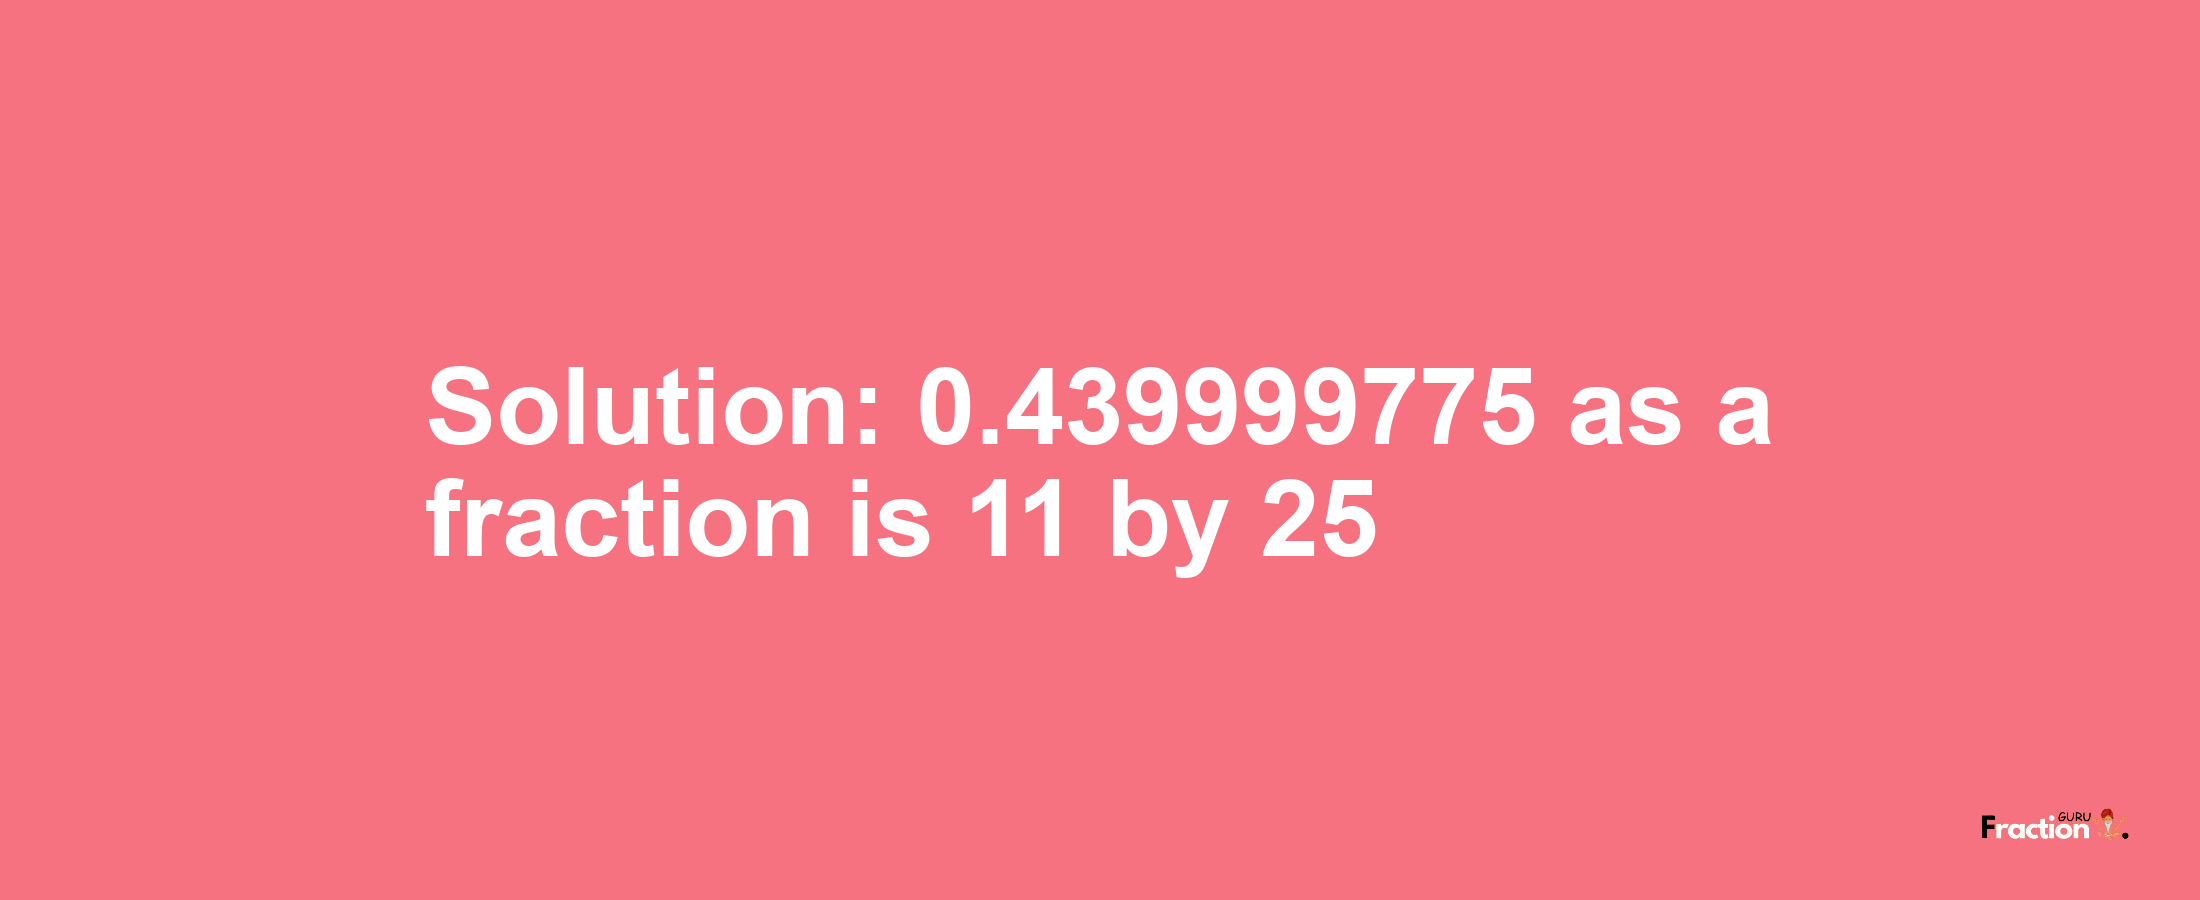 Solution:0.439999775 as a fraction is 11/25